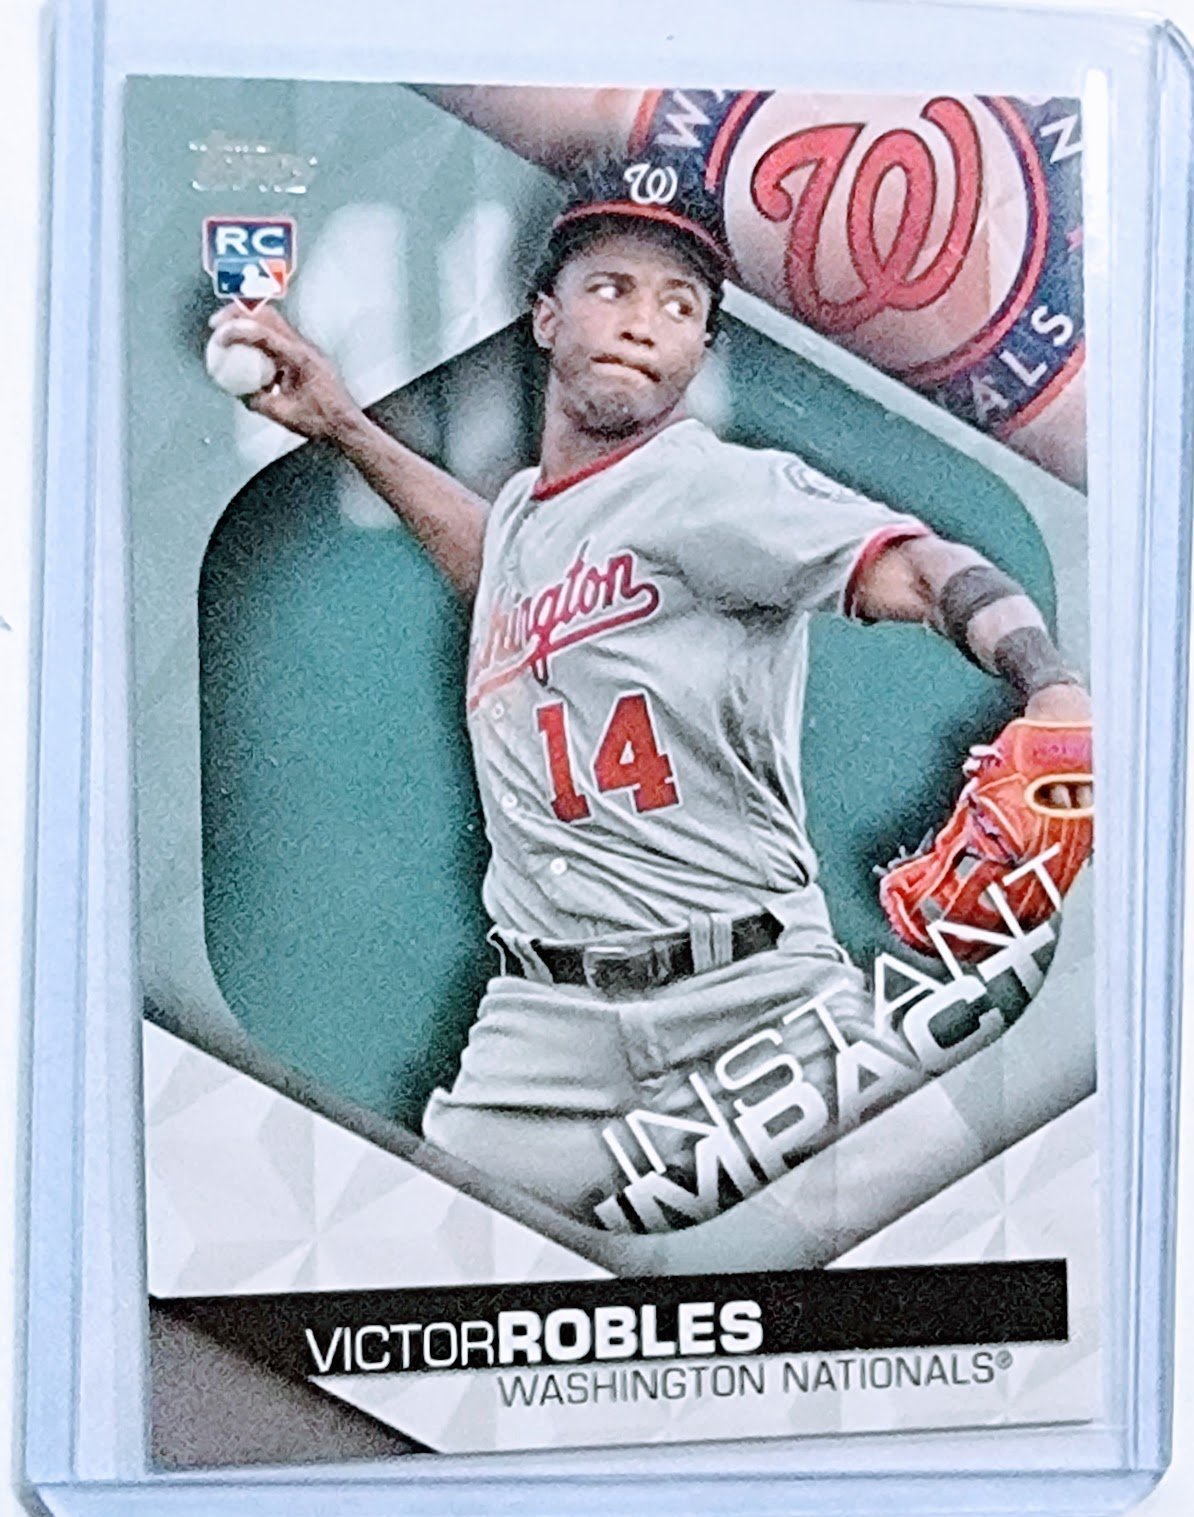 2018 Topps Update Victor Robles Rookie Baseball Card TPTV simple Xclusive Collectibles   